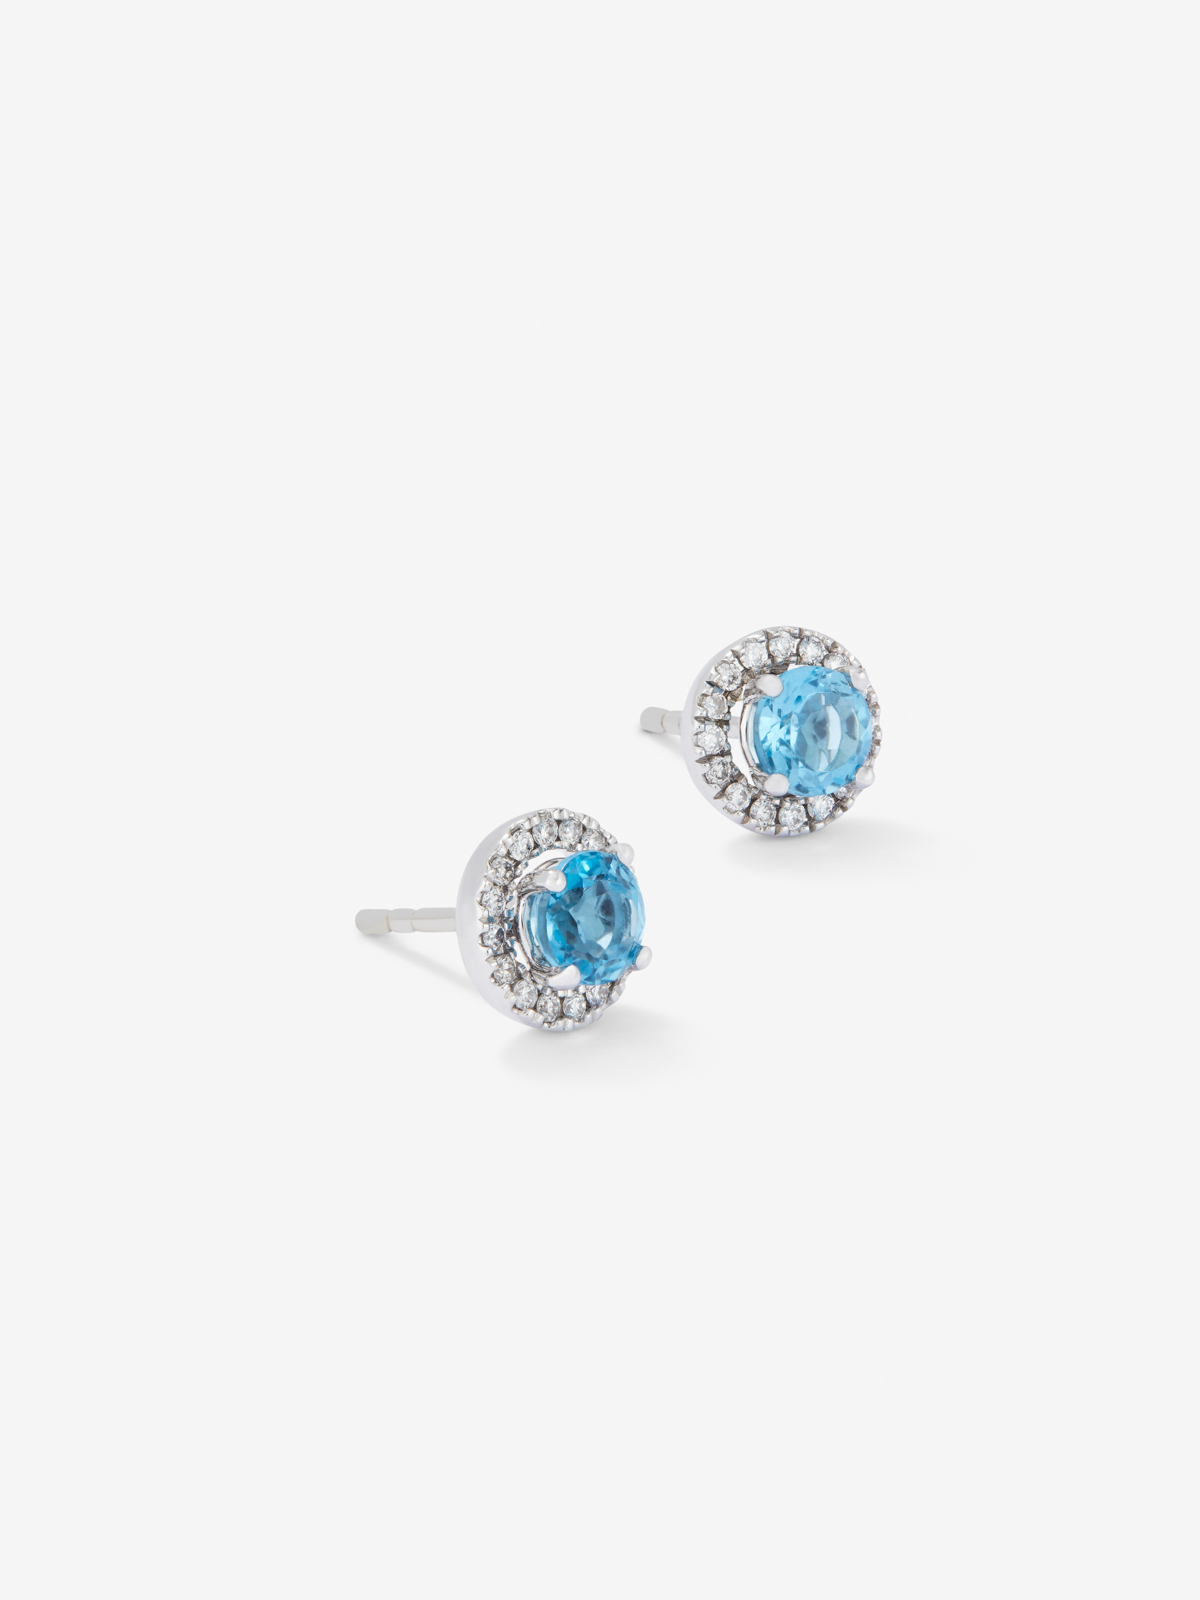 18K White Gold Button Earrings with Topaz and Diamond